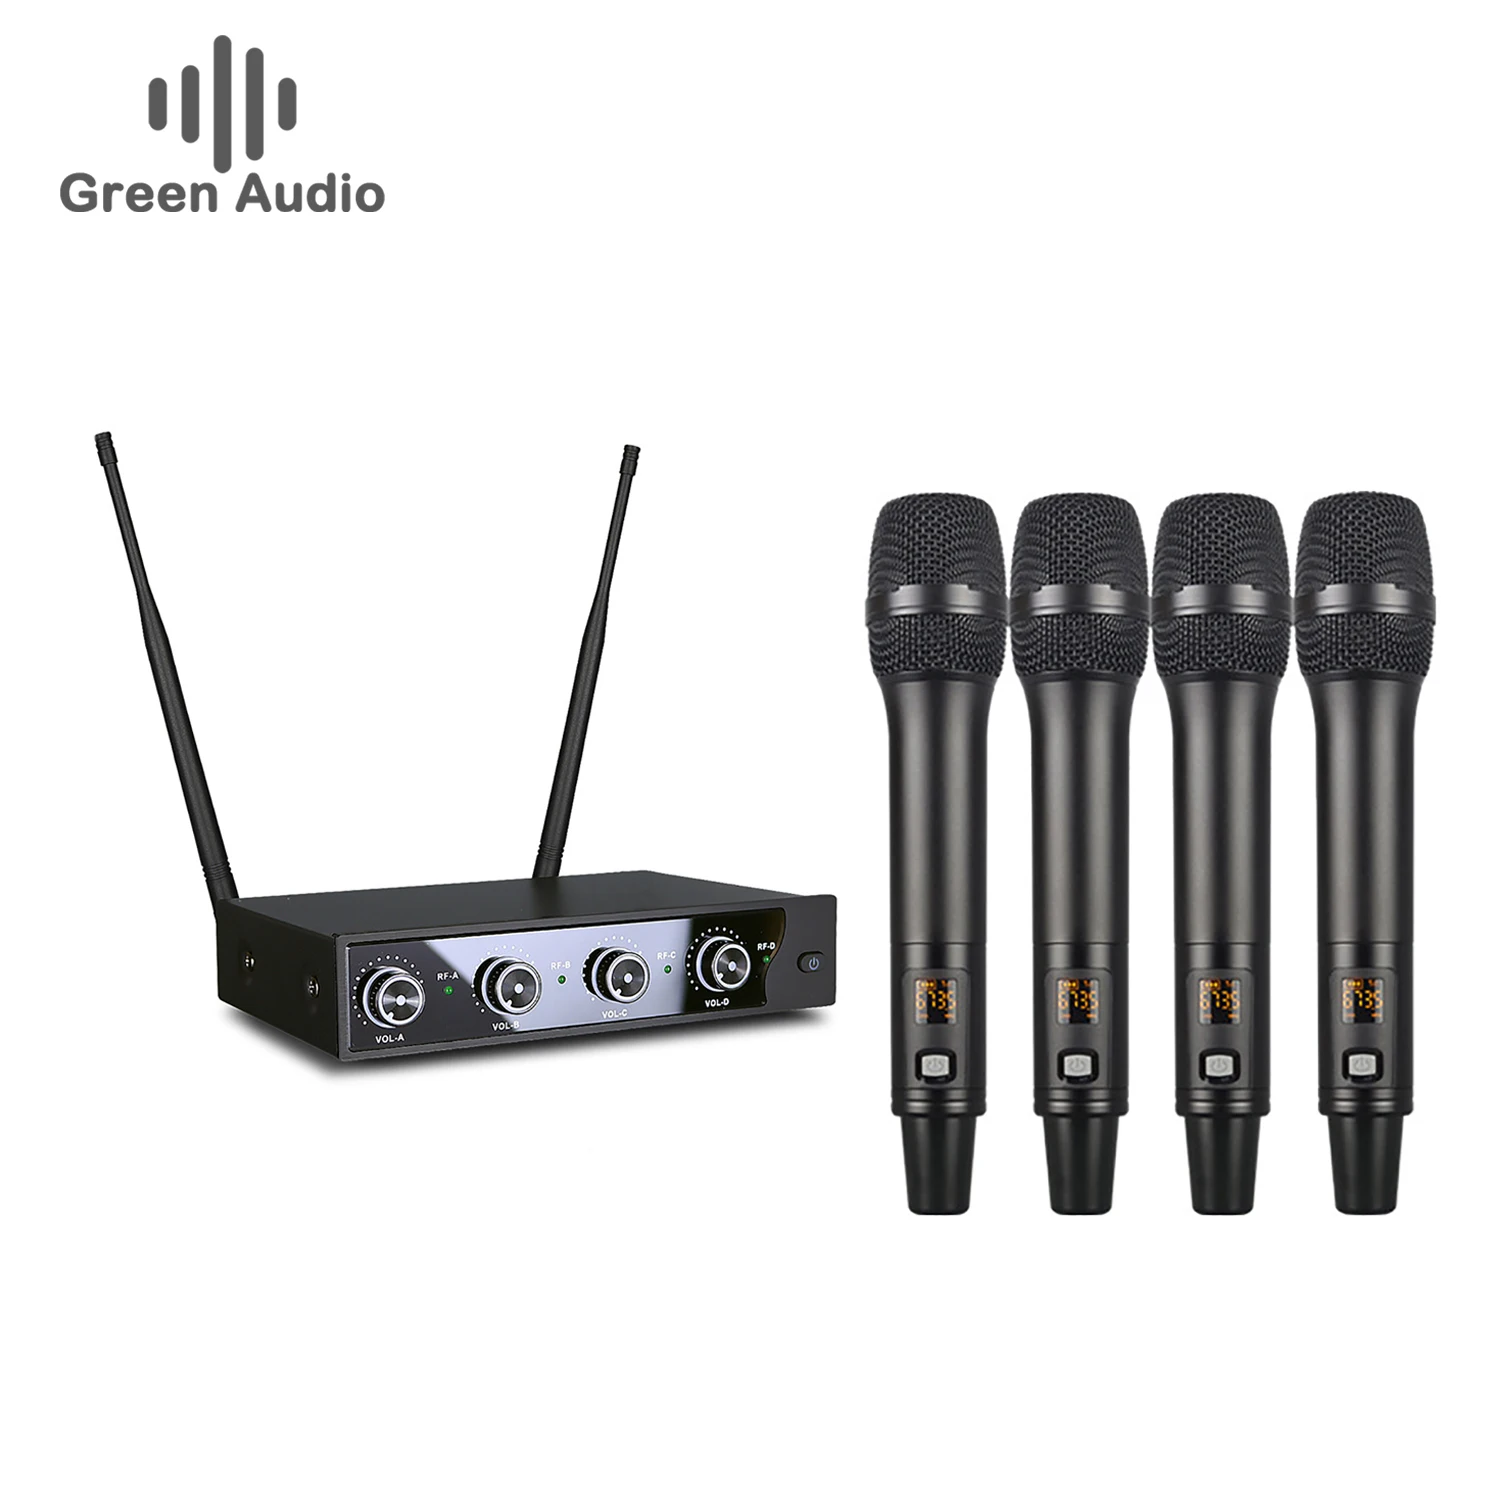 

GAW-G9 One to four professional conference performance home wireless microphone